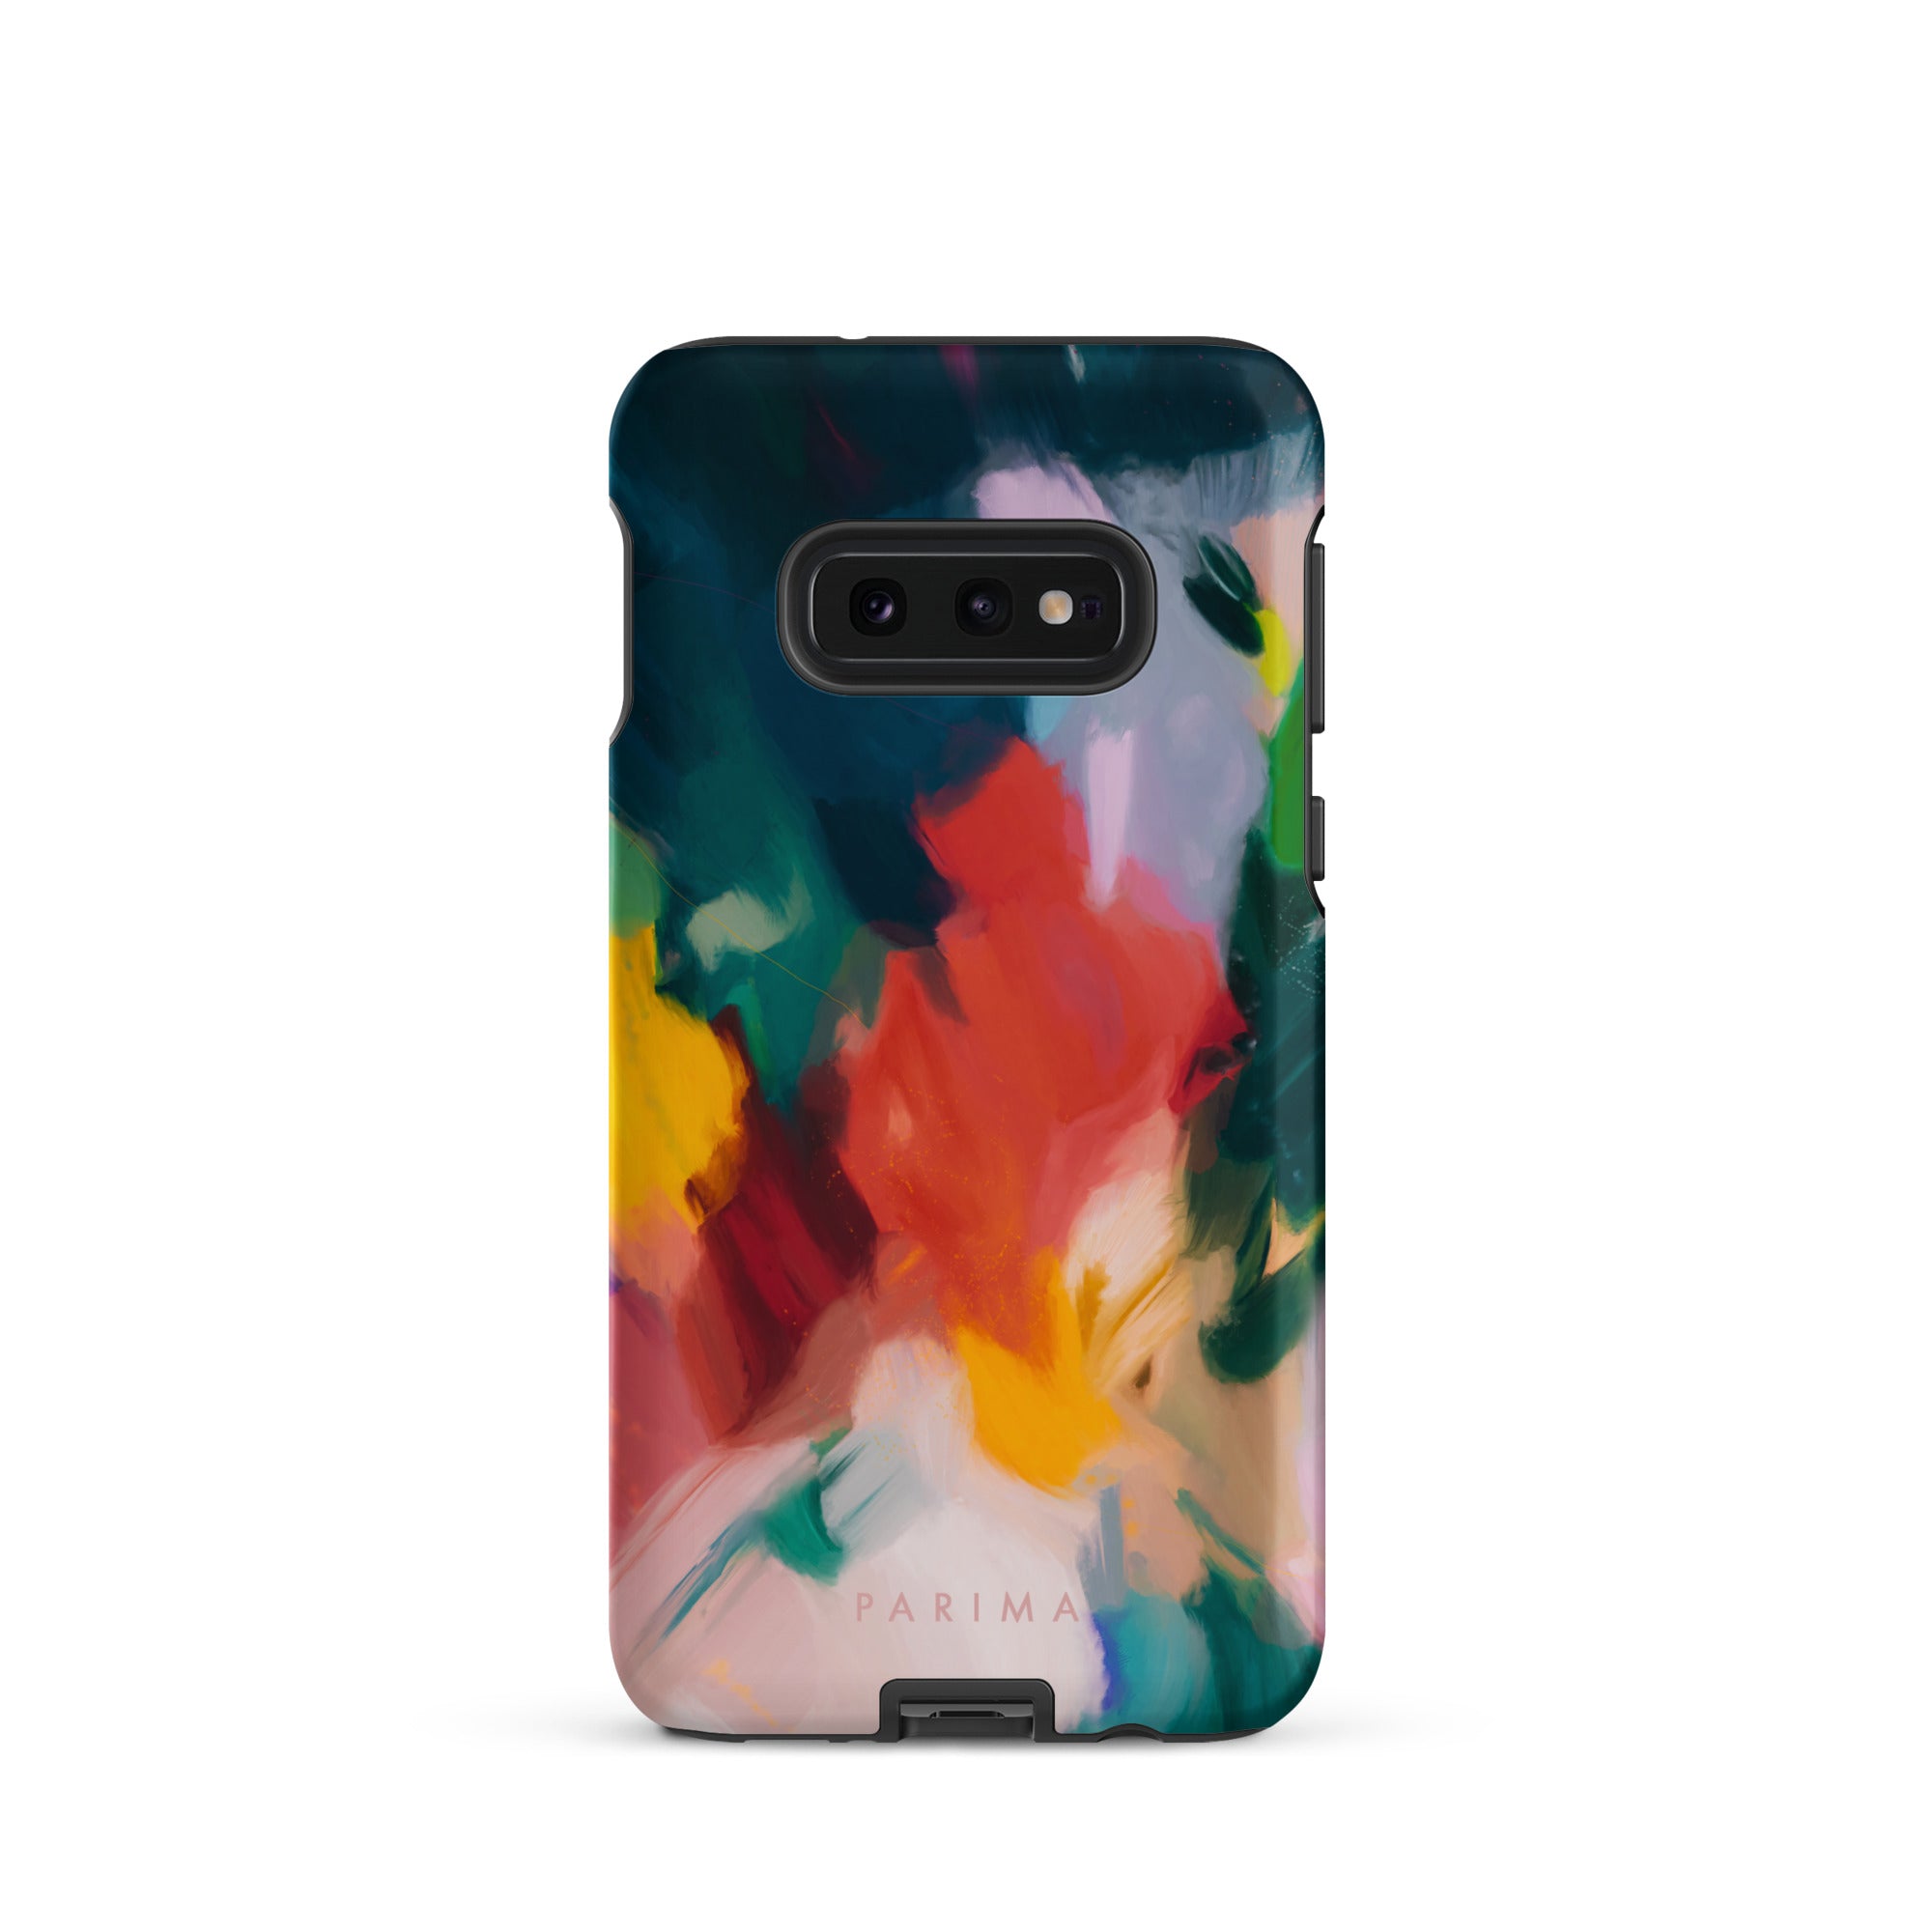 Pomme, blue and red abstract art on Samsung Galaxy S10e tough case by Parima Studio